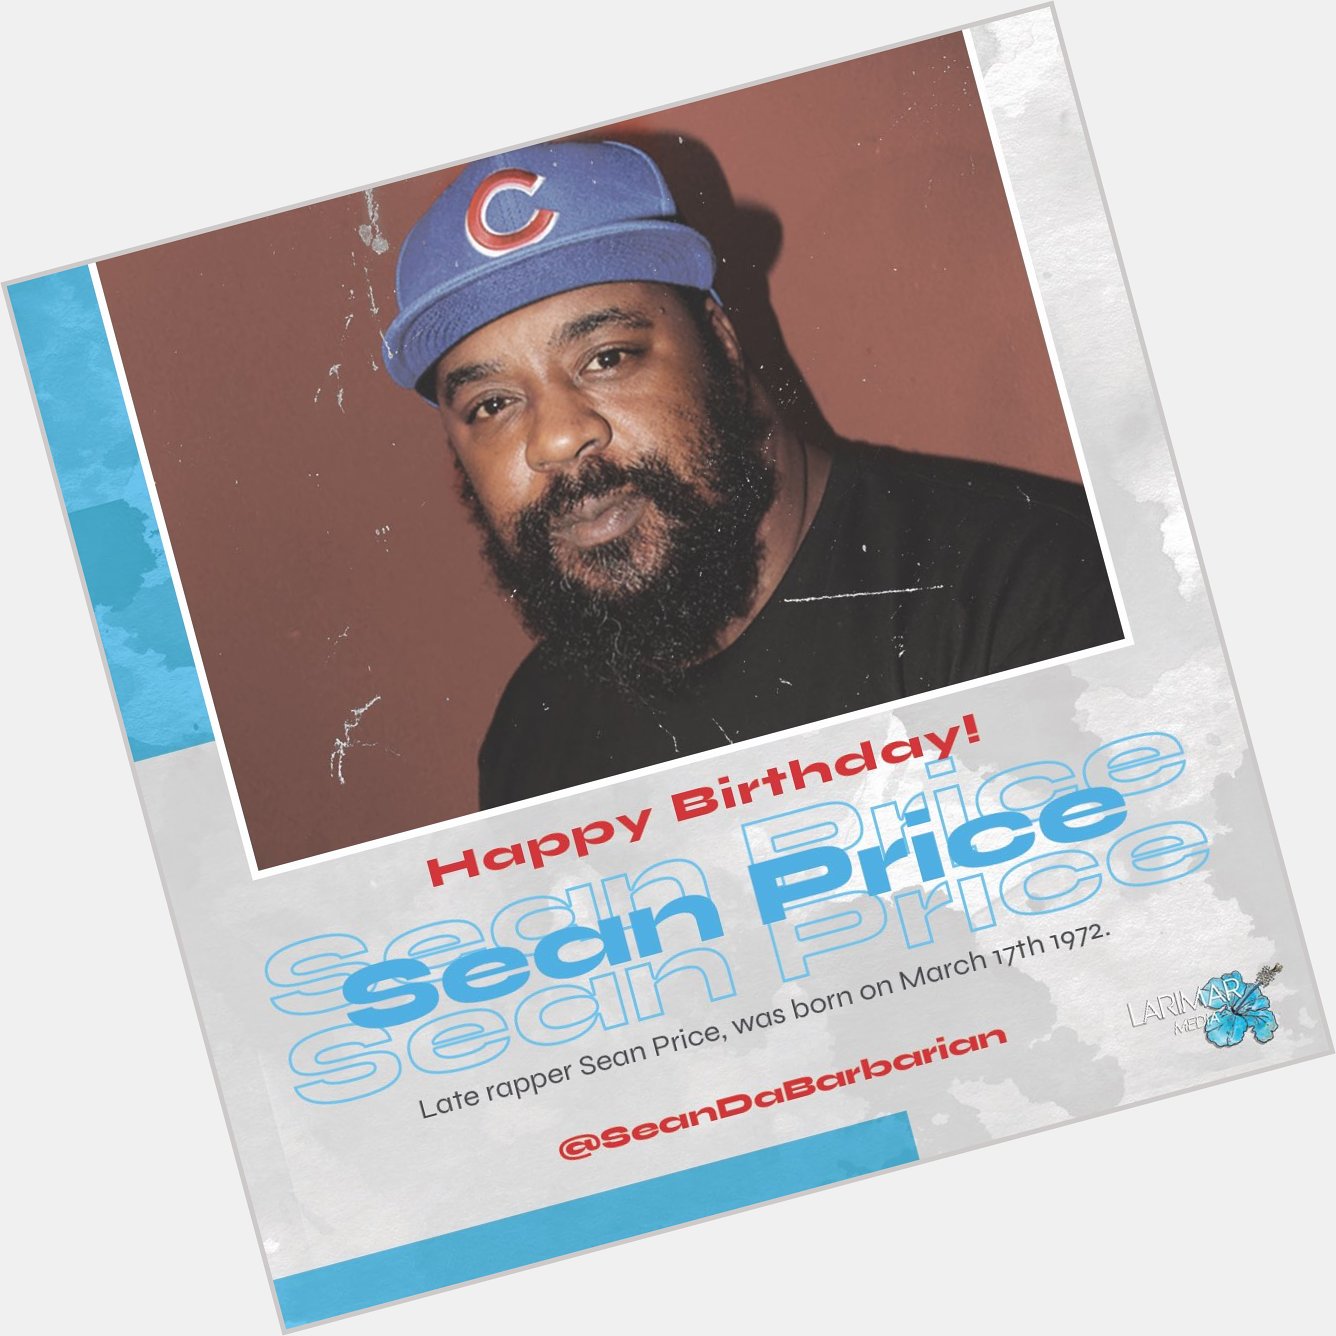 Happy Birthday and R.I.P to the late legendary underground rapper, Sean Price!    